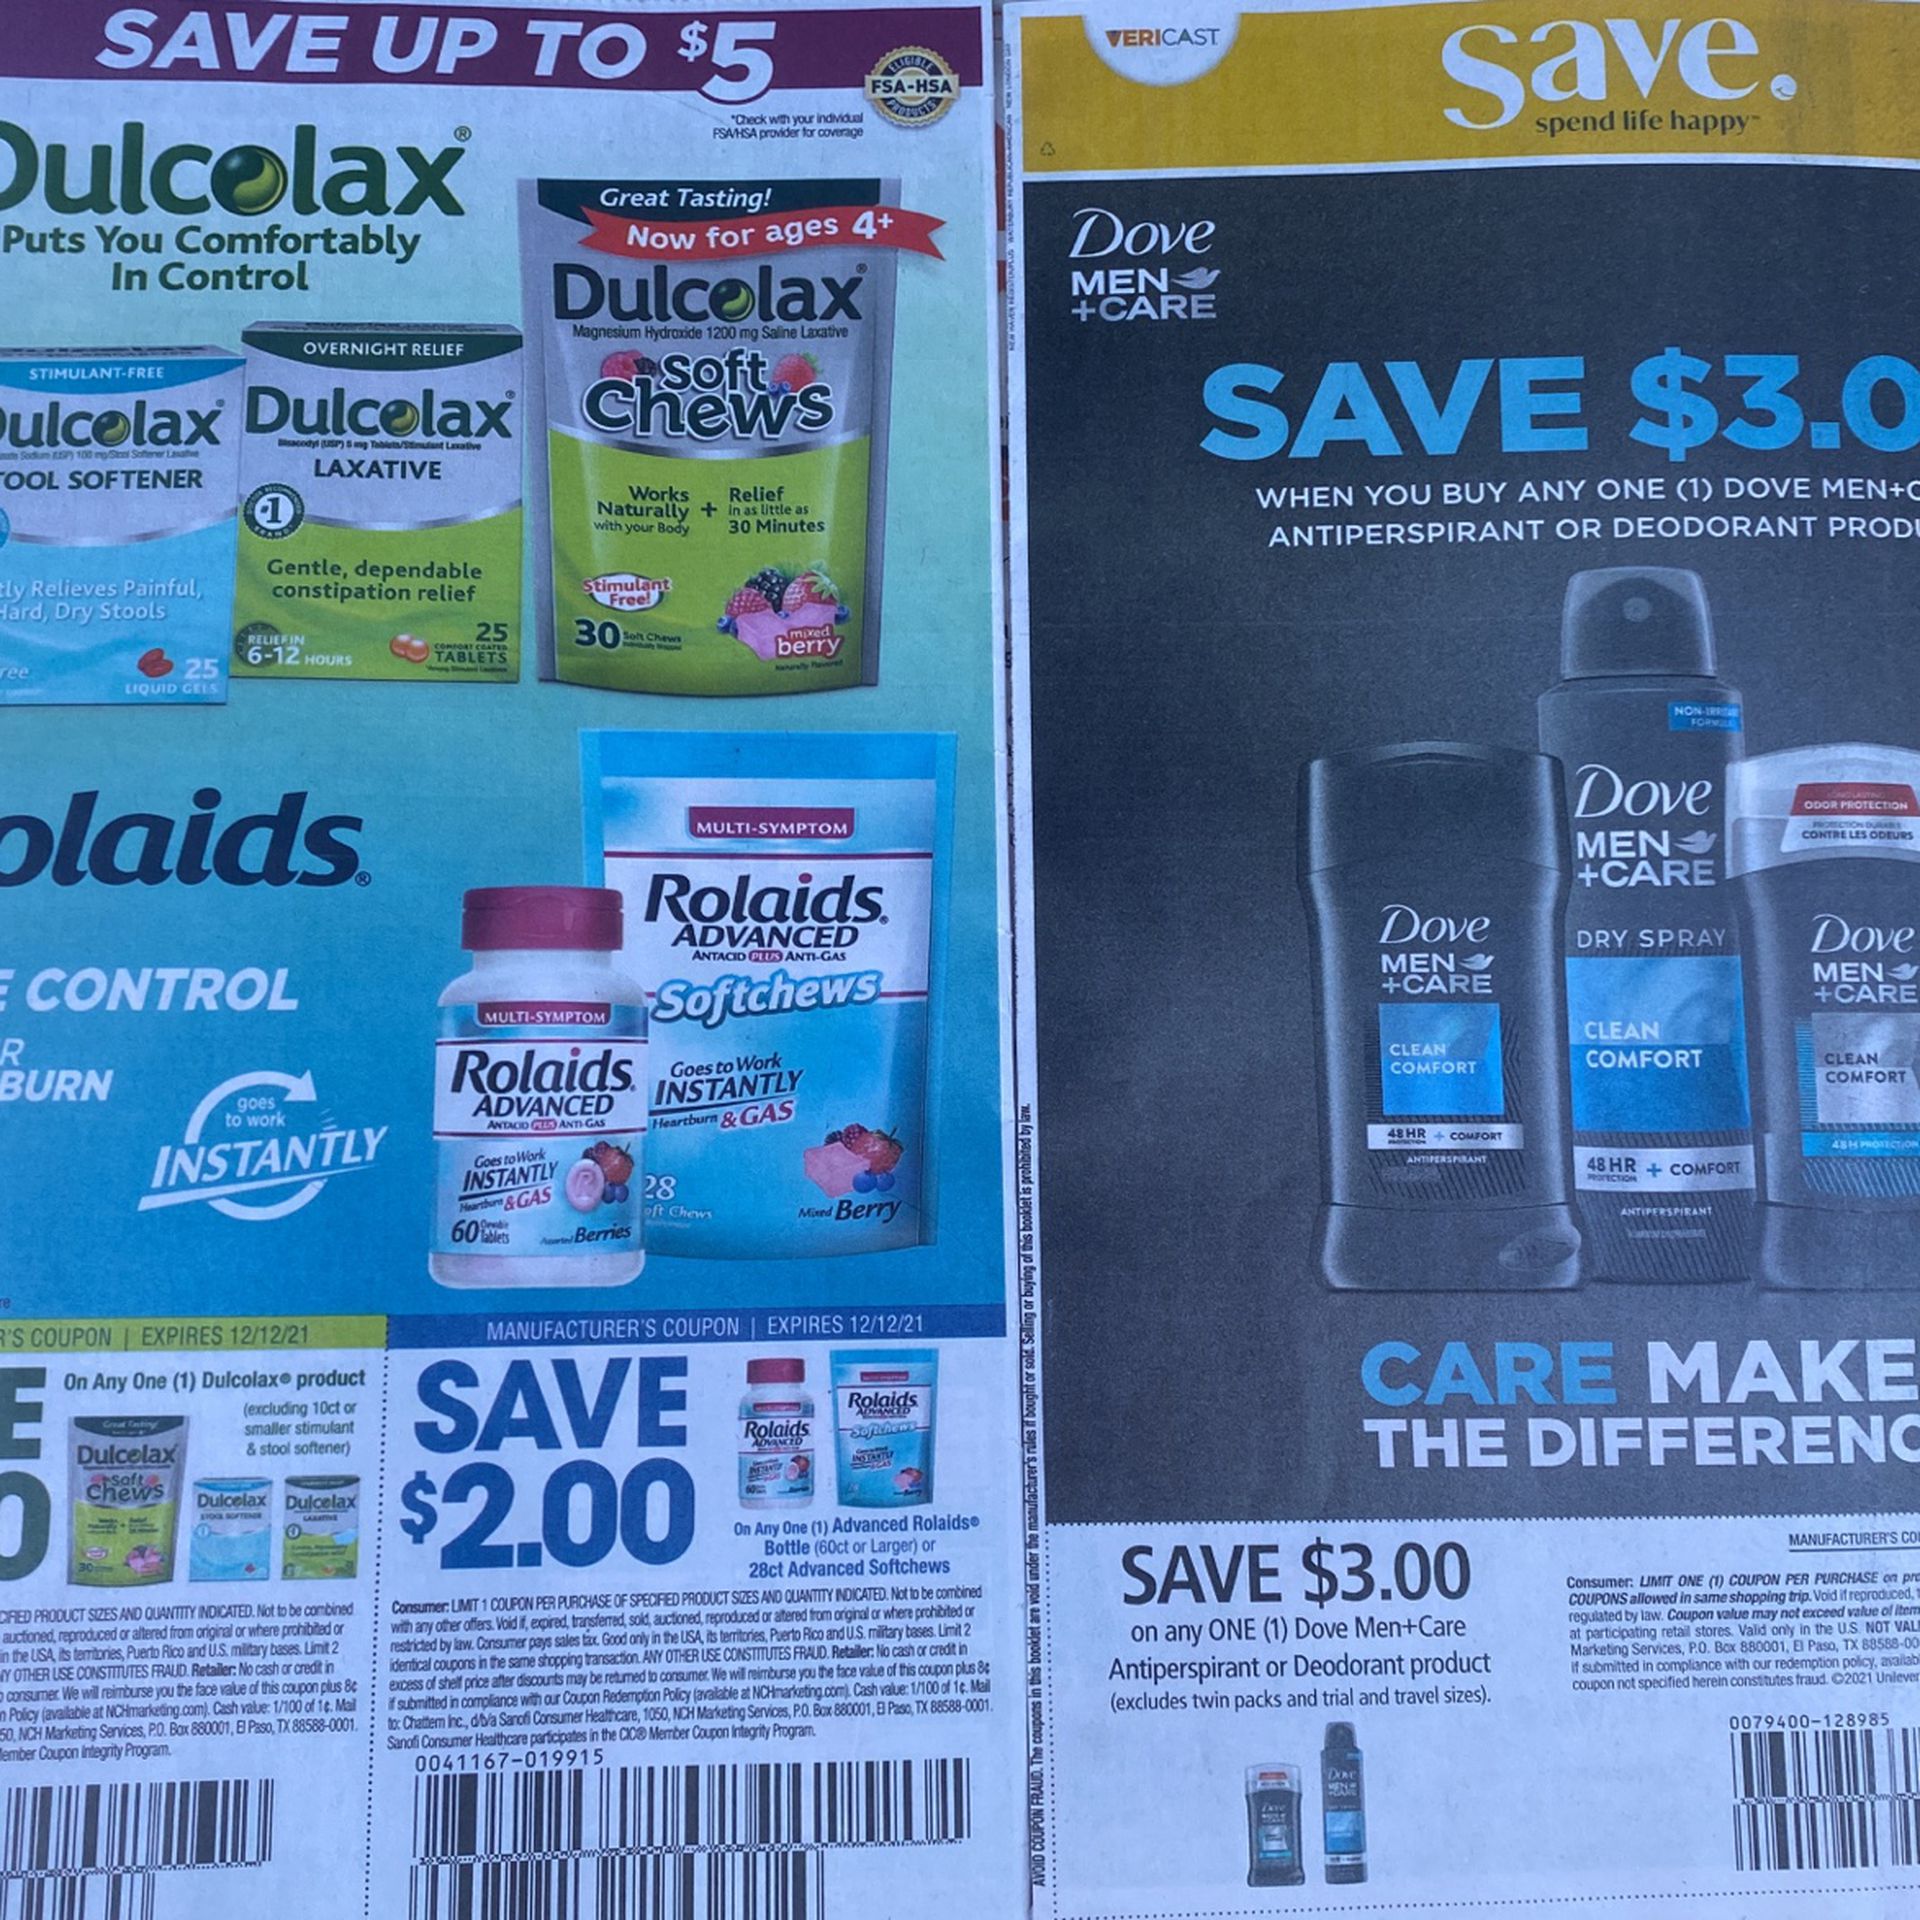 Coupons (current Week) $1 Each 